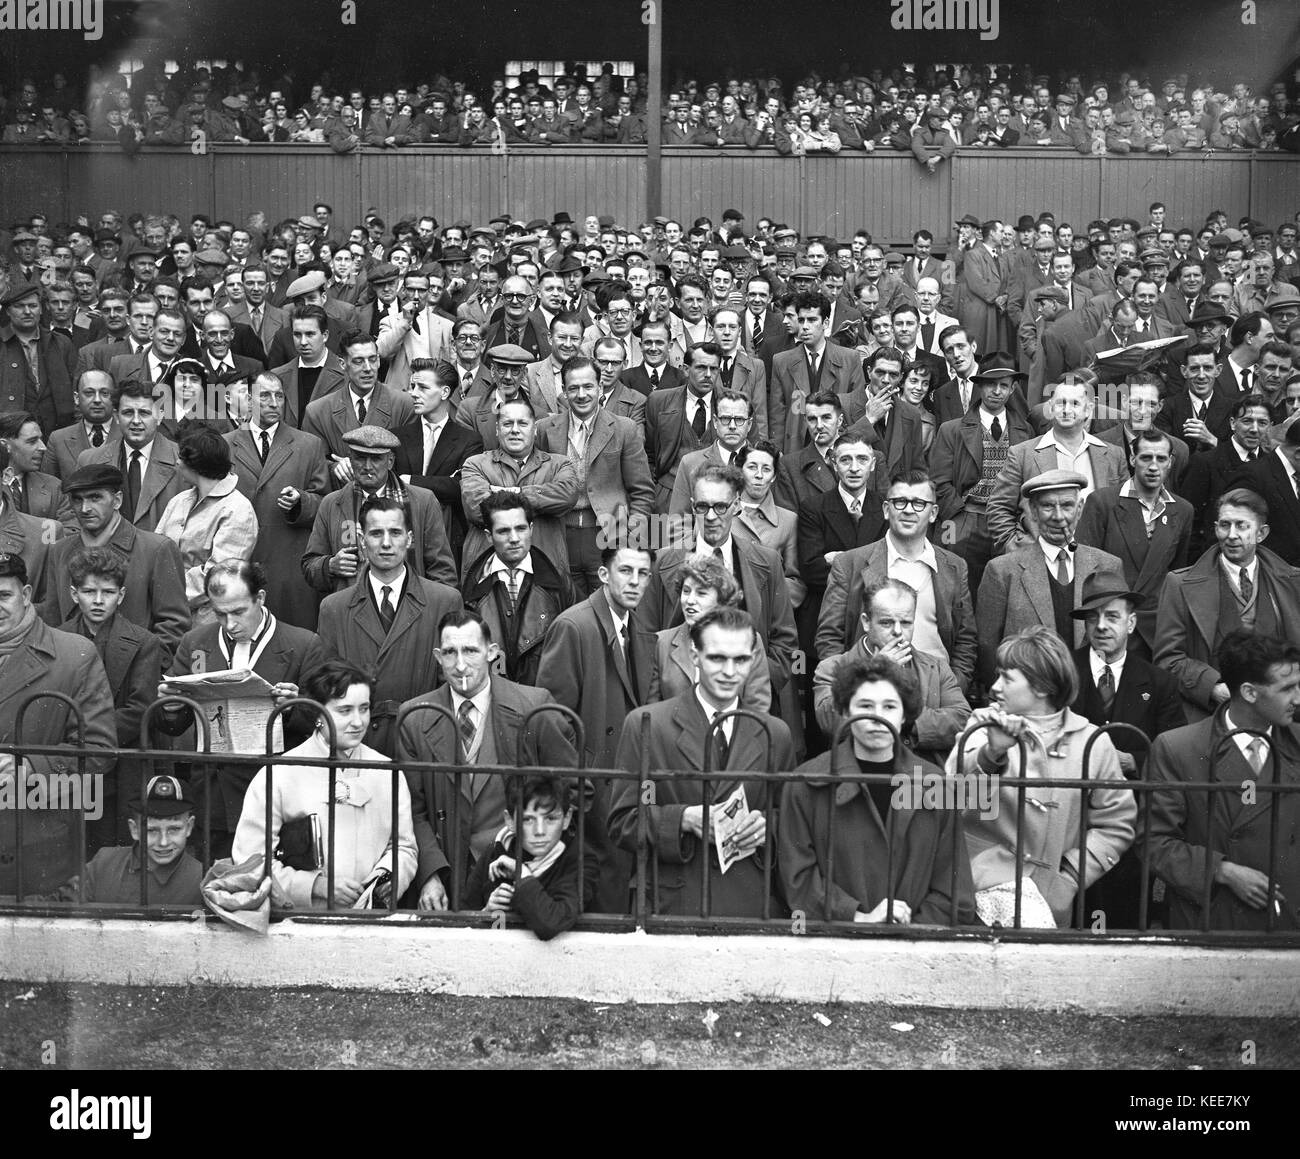 Derby County fans faces in the crowd in attendance at the Osmaston End of The Baseball Ground c1955.  Photograph by Tony Henshaw *** Local Caption *** From the original glass negative From the wholly-owned original negative. Stock Photo